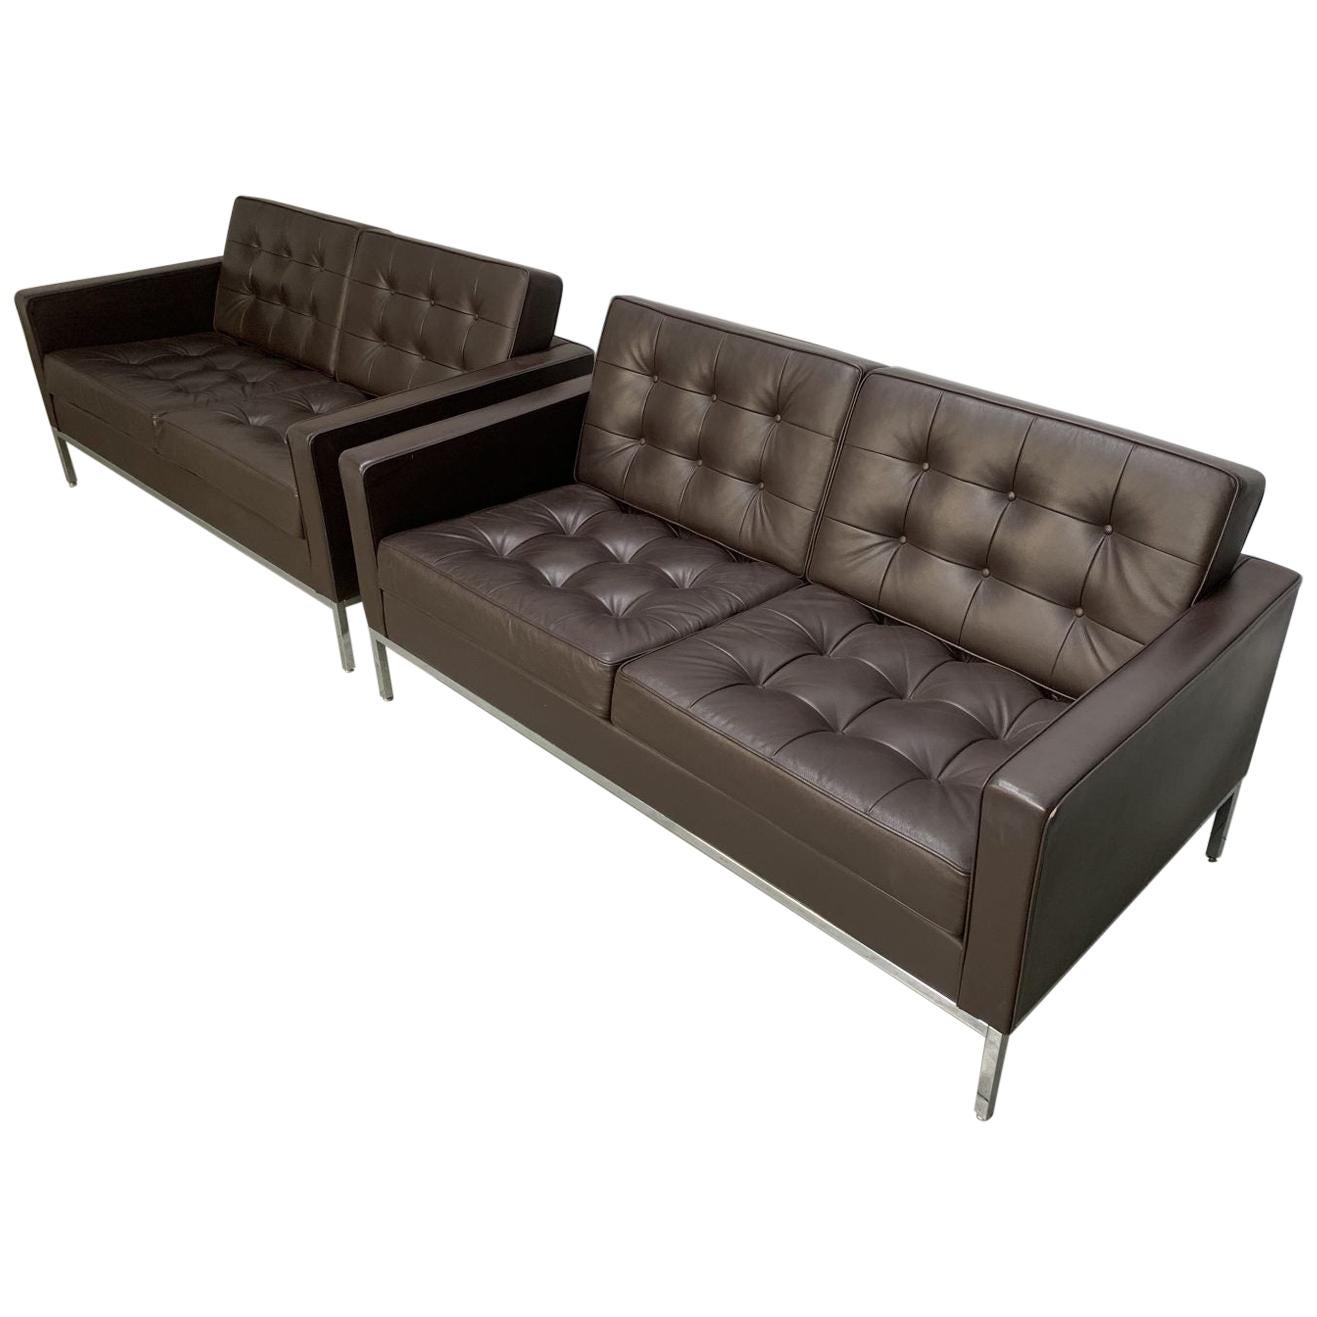 Pair of Knoll Studio “Florence Knoll” Settee Sofas in “Sabrina” Brown Leather